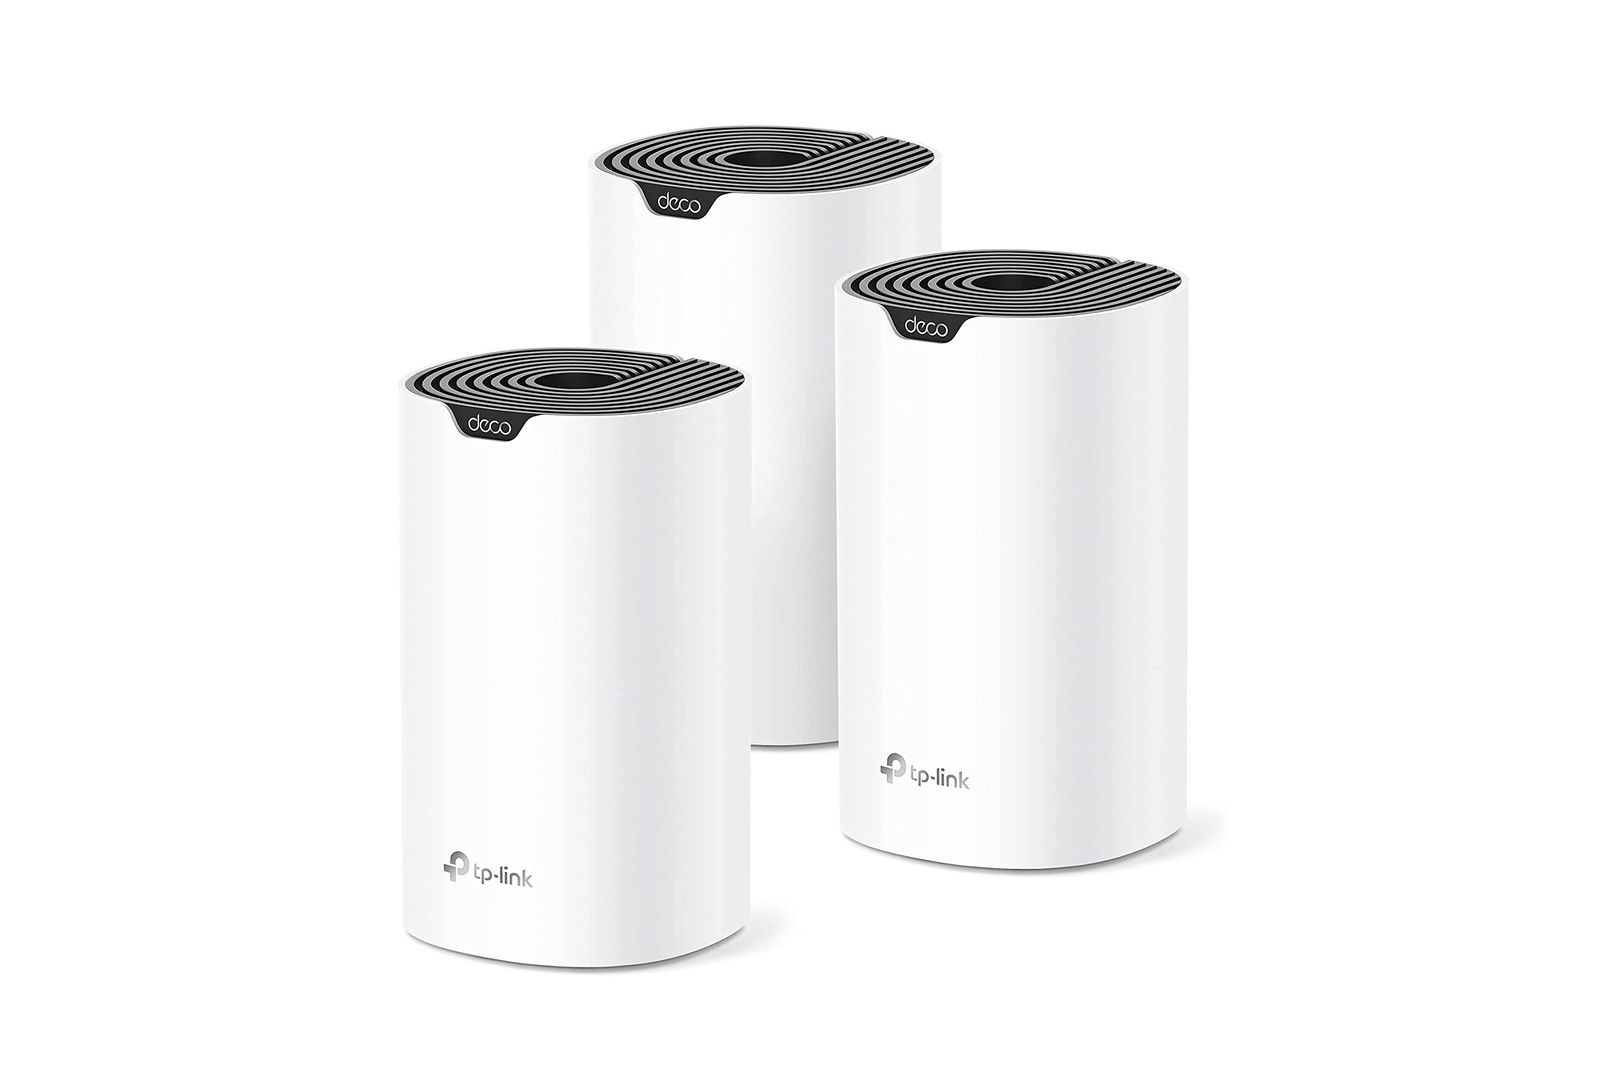 best mesh wifi systems photo 20